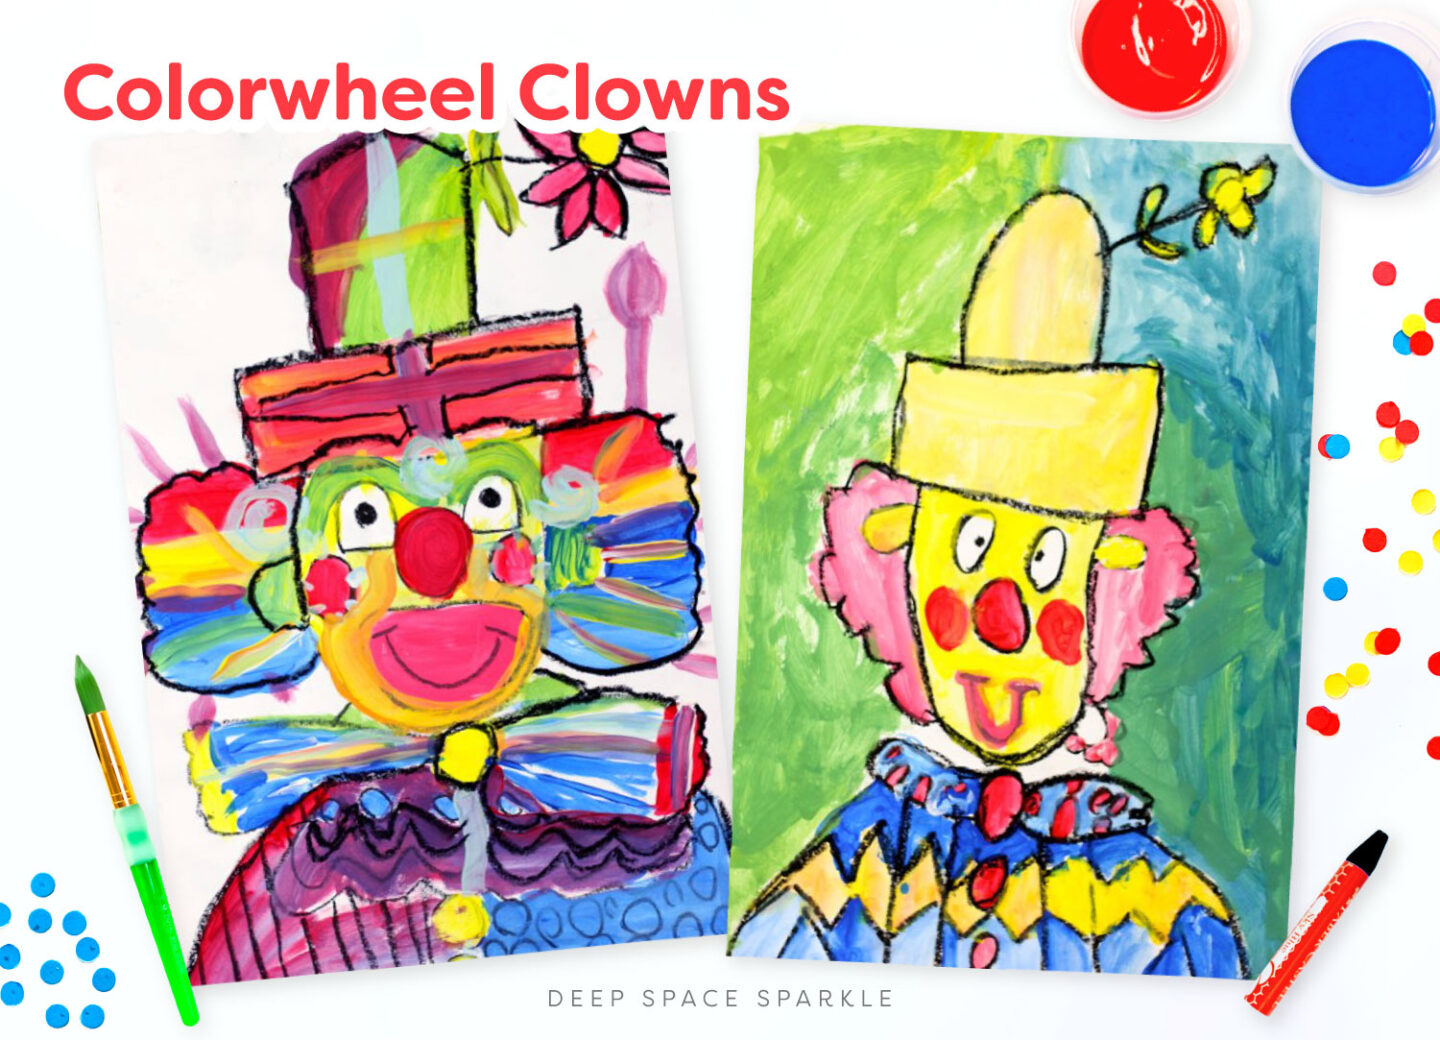 How to Teach Color Theory in the art classroom with Colorwheel Clowns